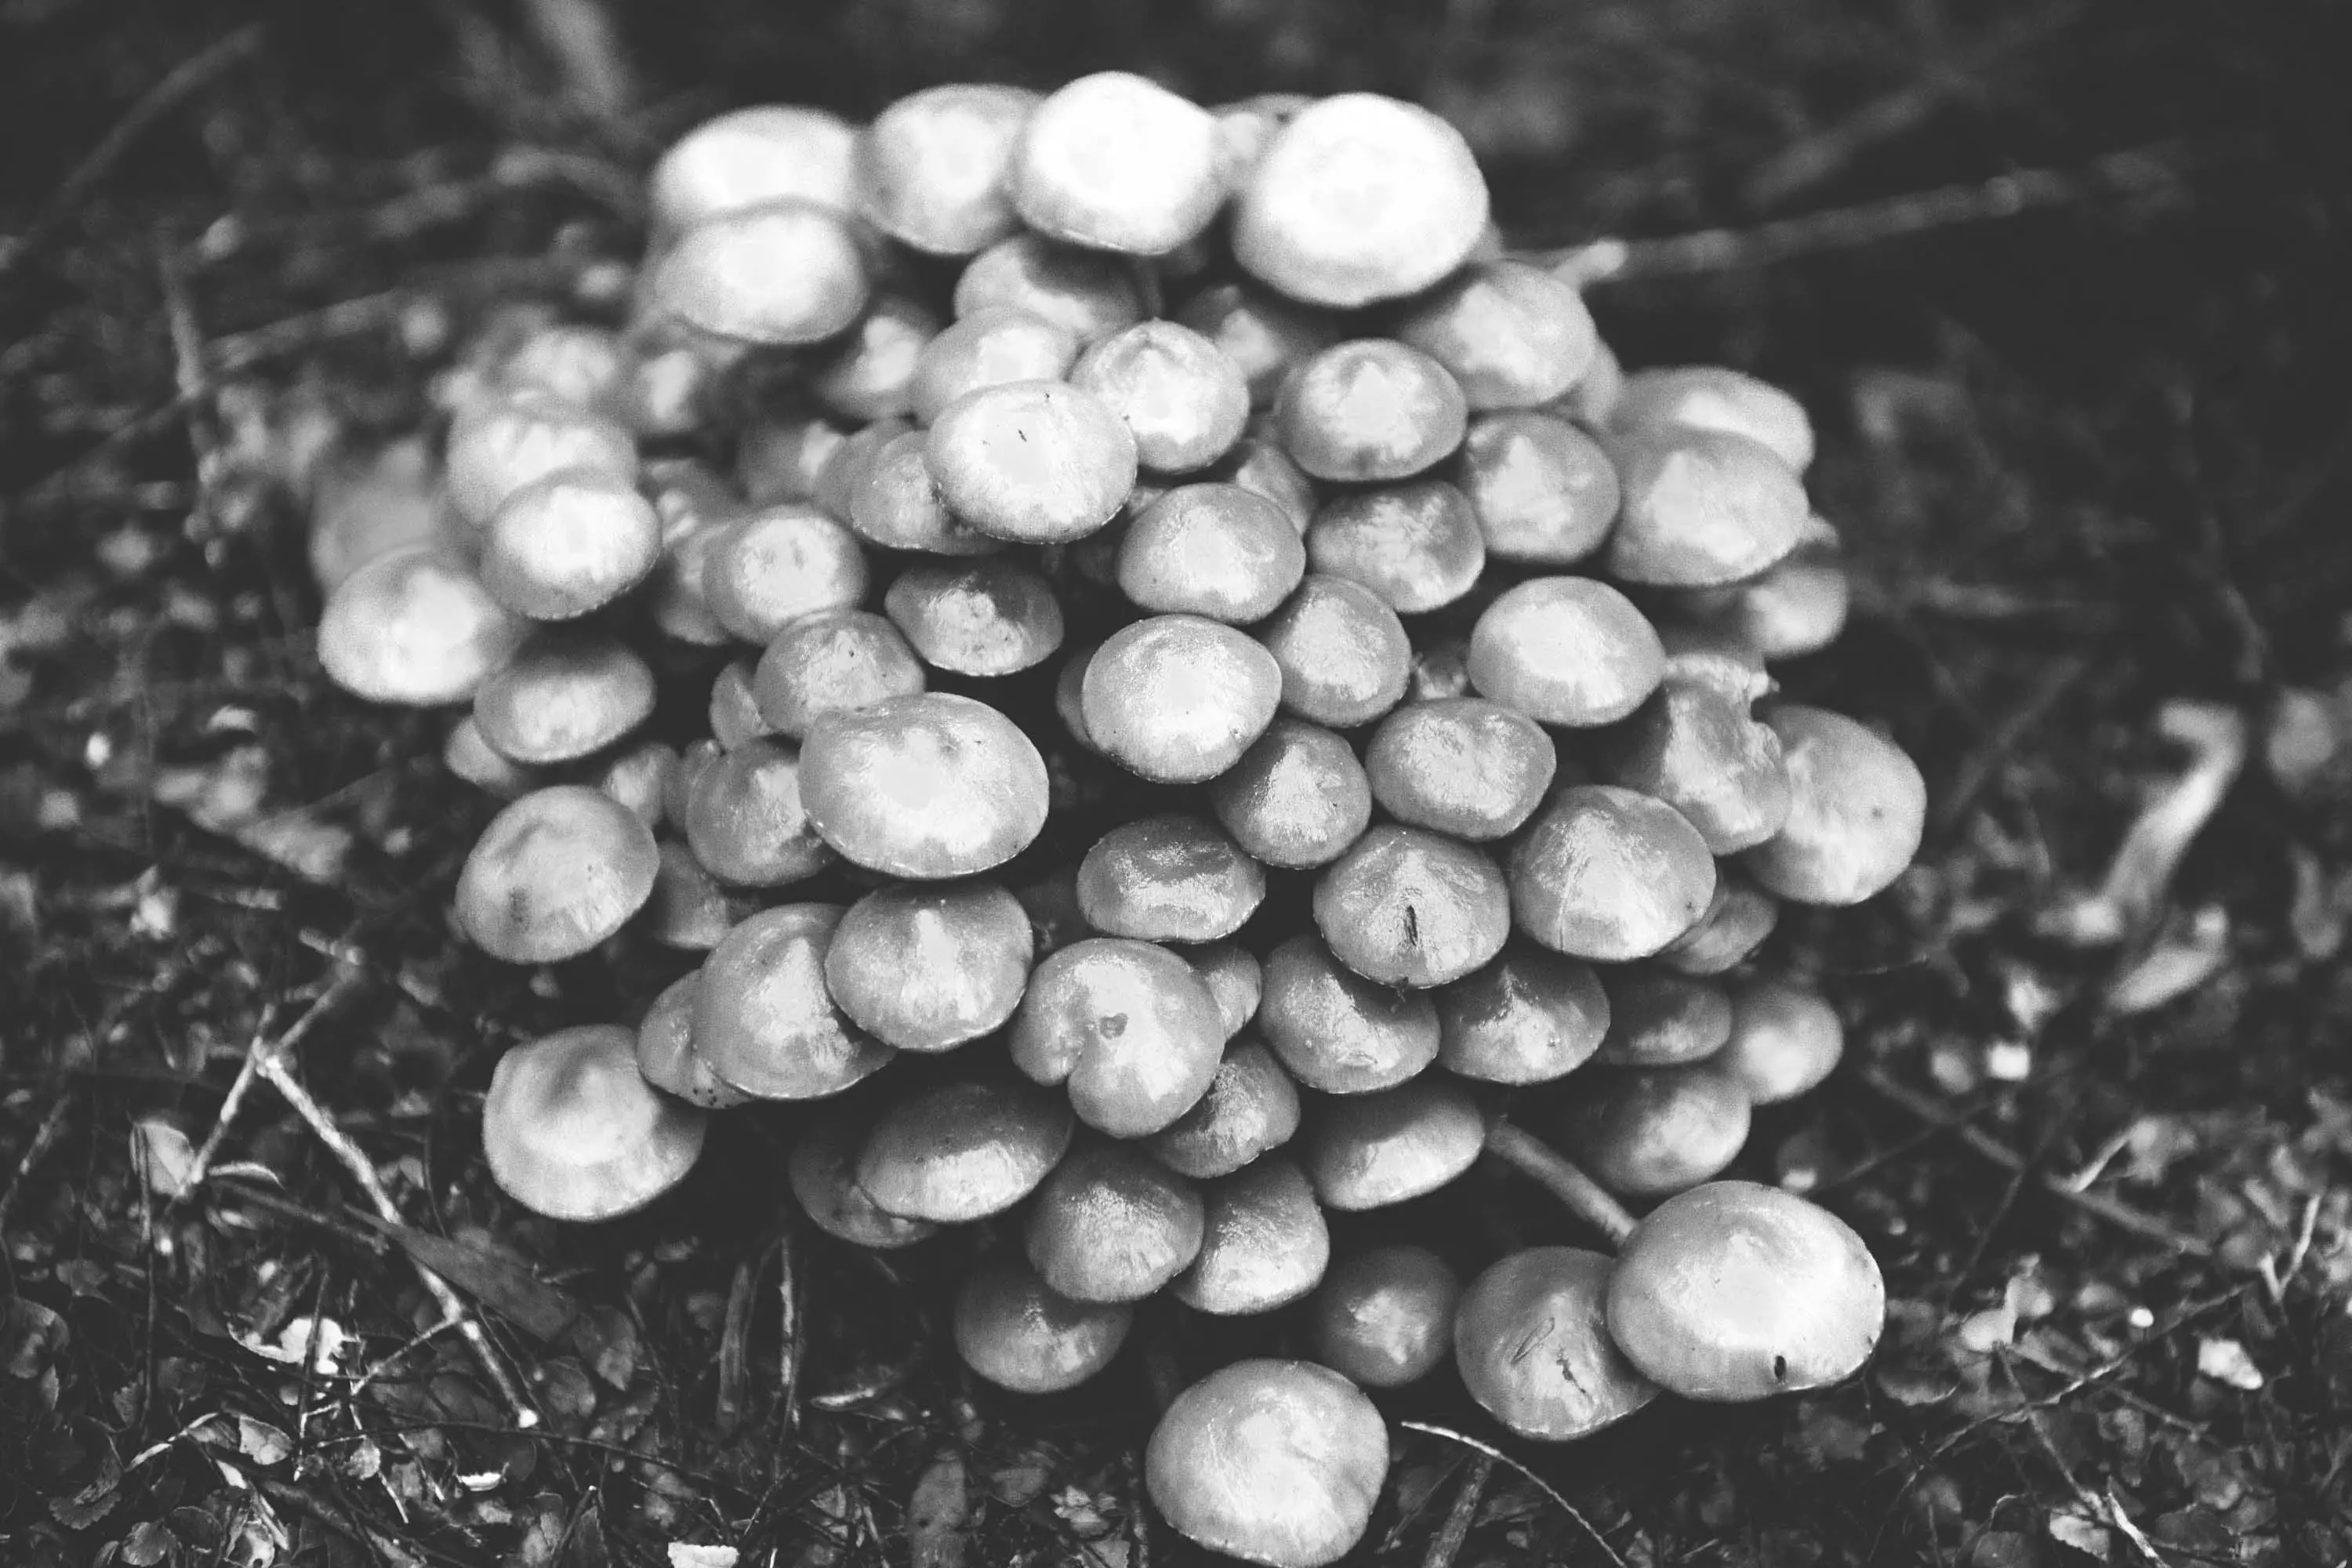 A cluster of small, flat mushrooms grows from the leaf litter and soil. 